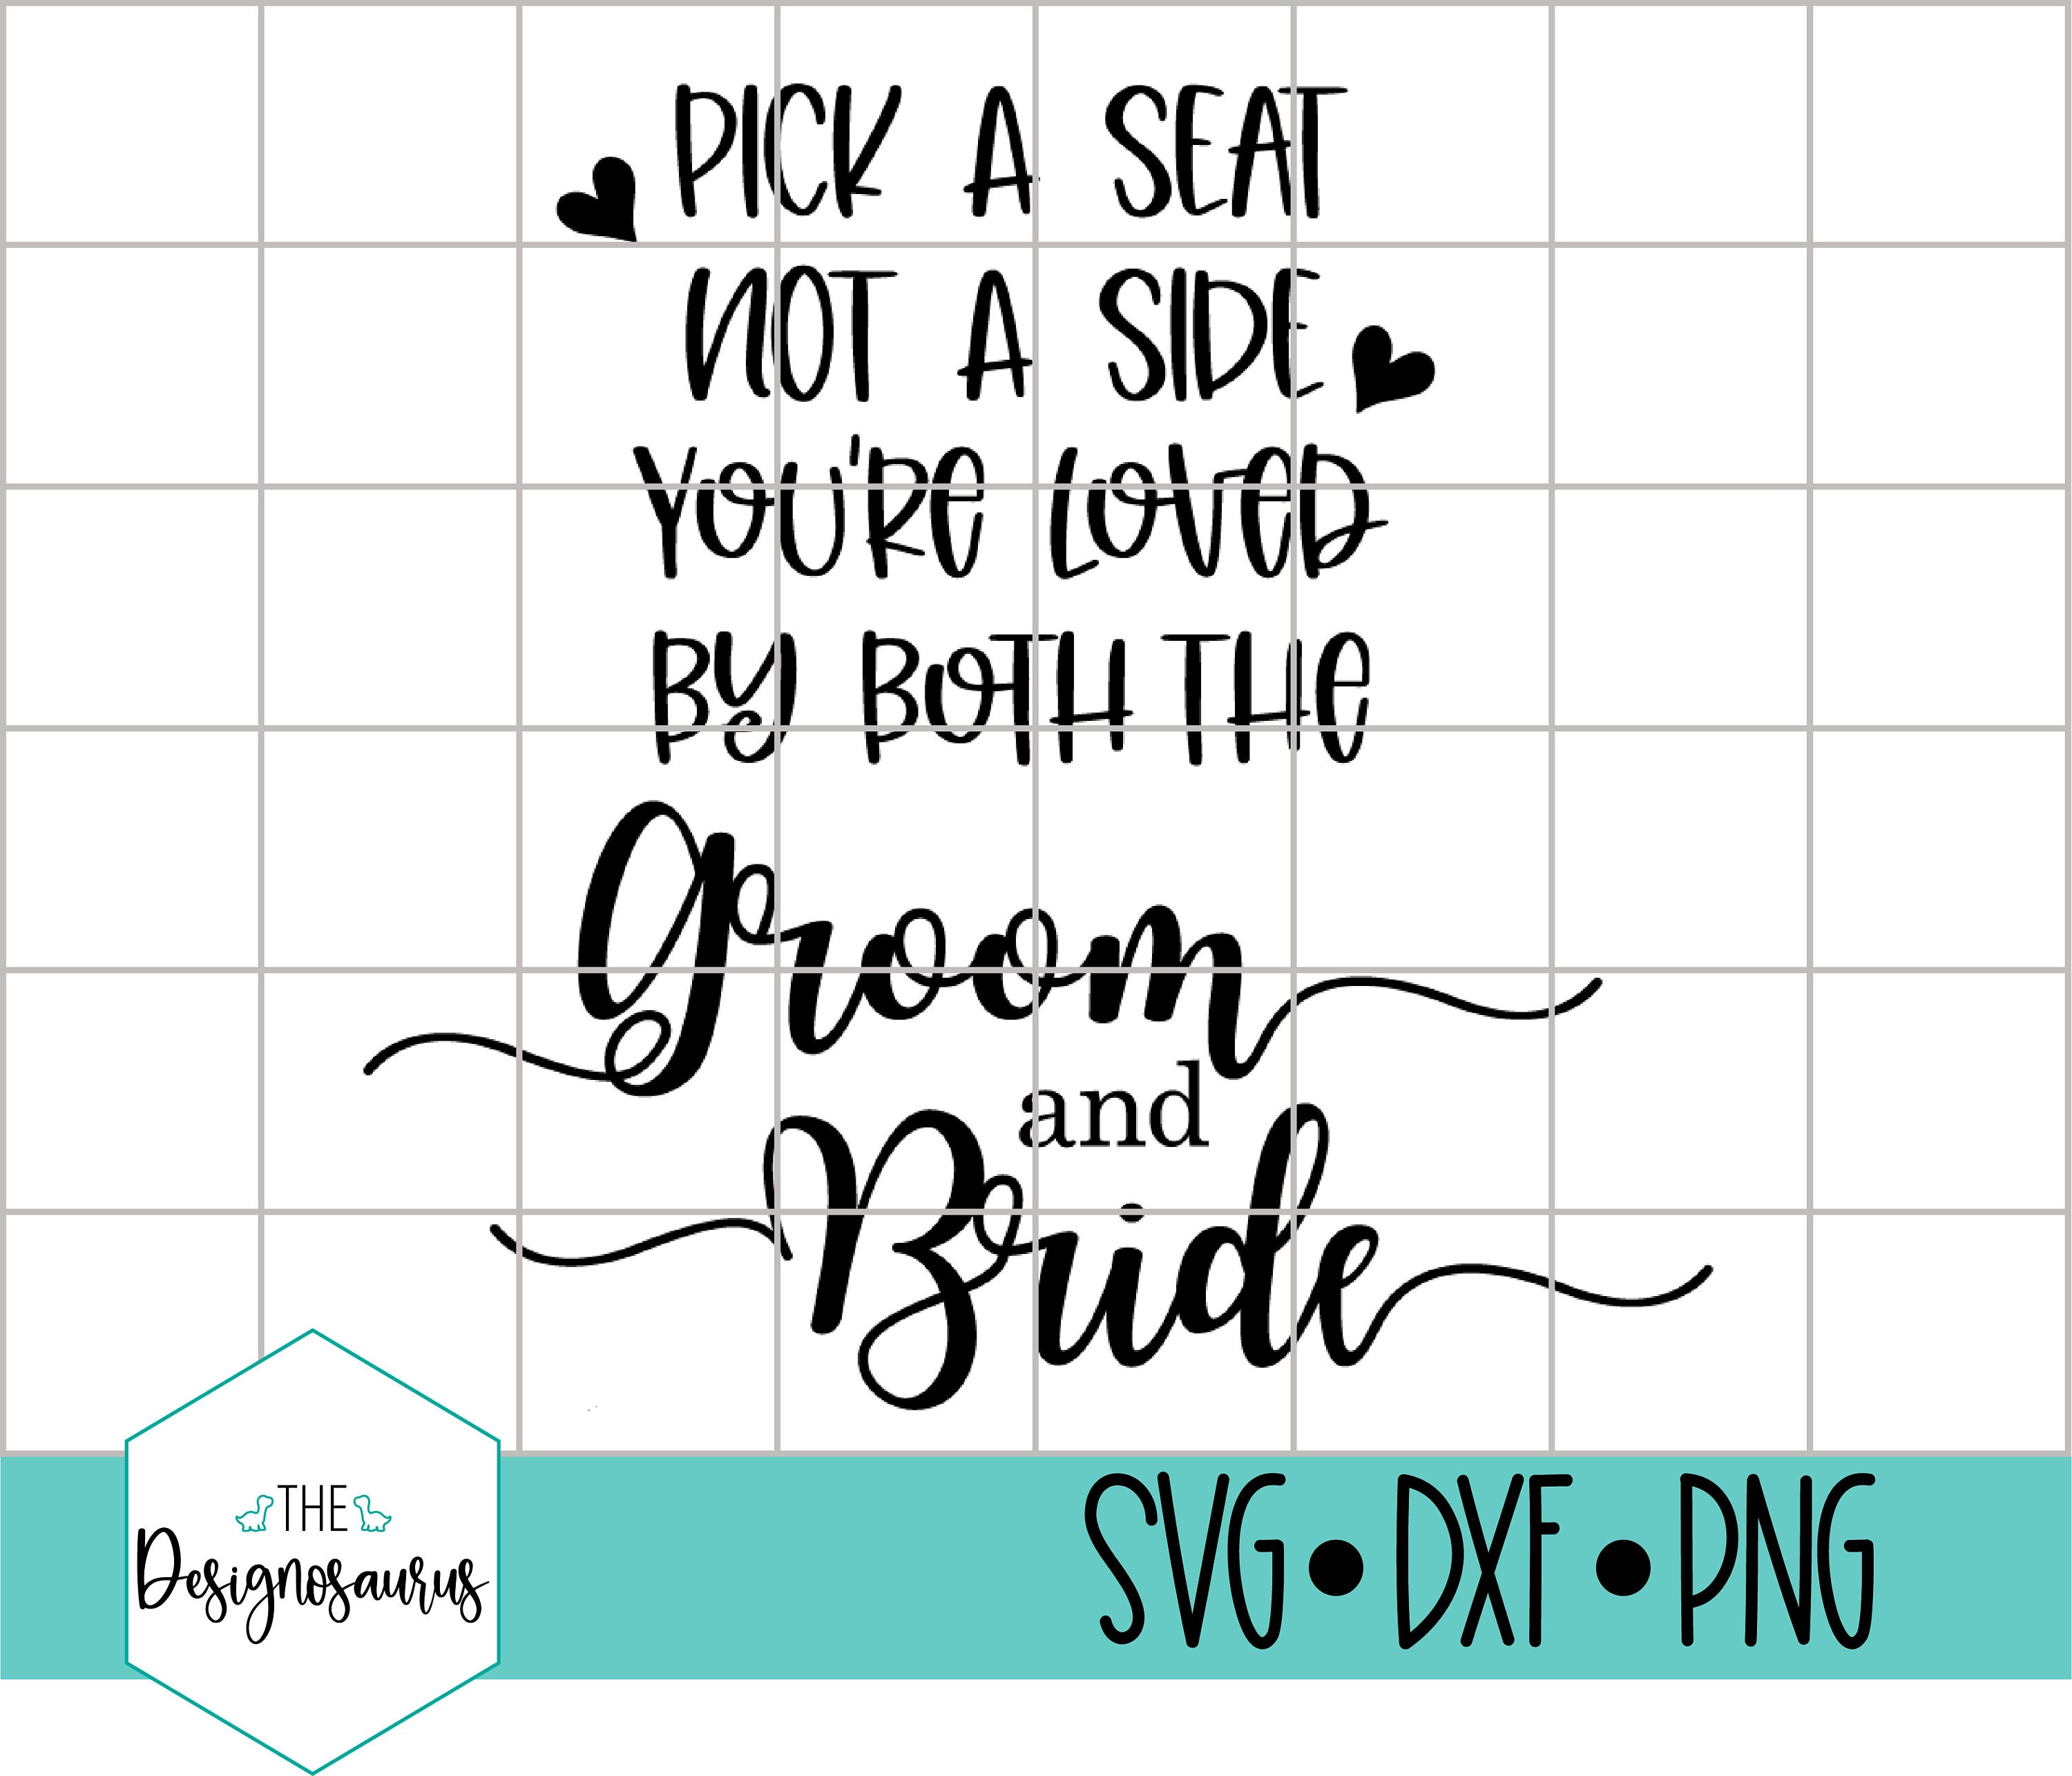 Pick a Seat Not a Side. You Are Loved by Both Groom and Bride